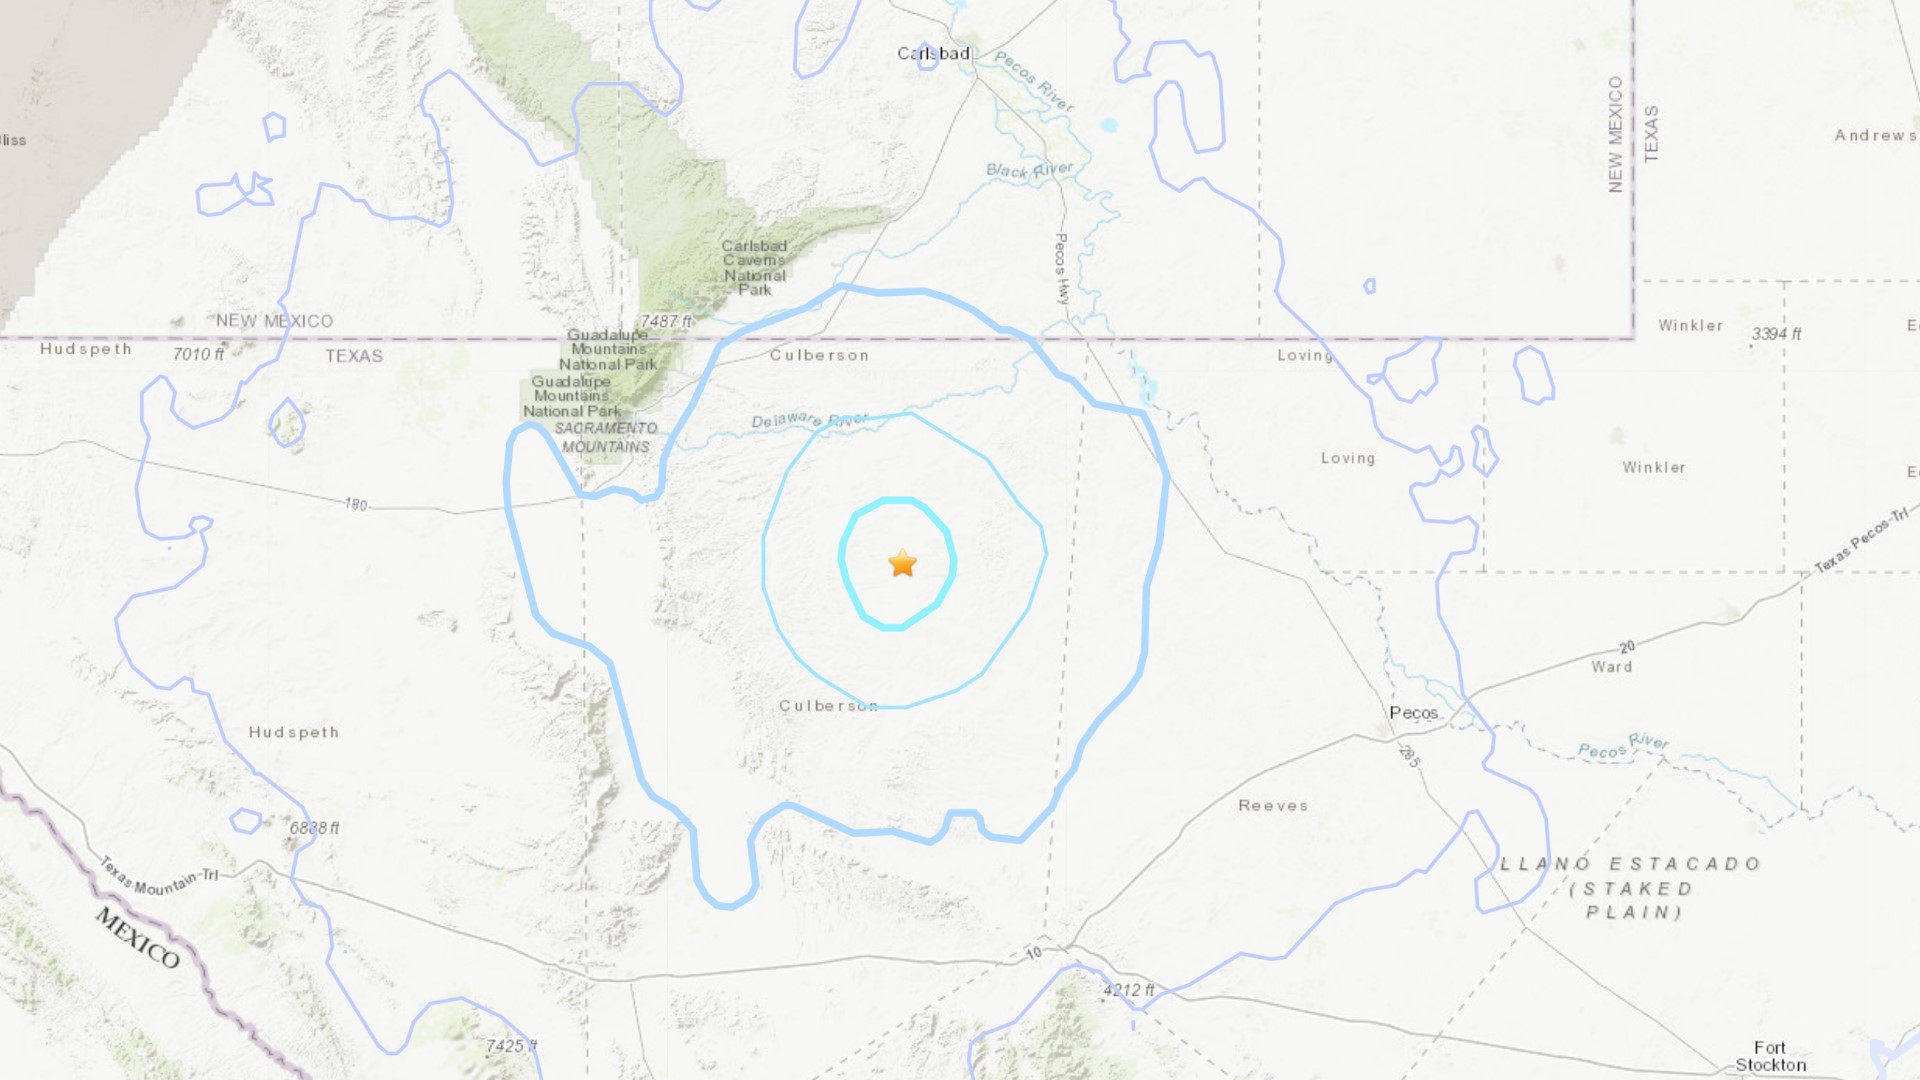 The largest of the three was a 3.6 magnitude near Pecos.